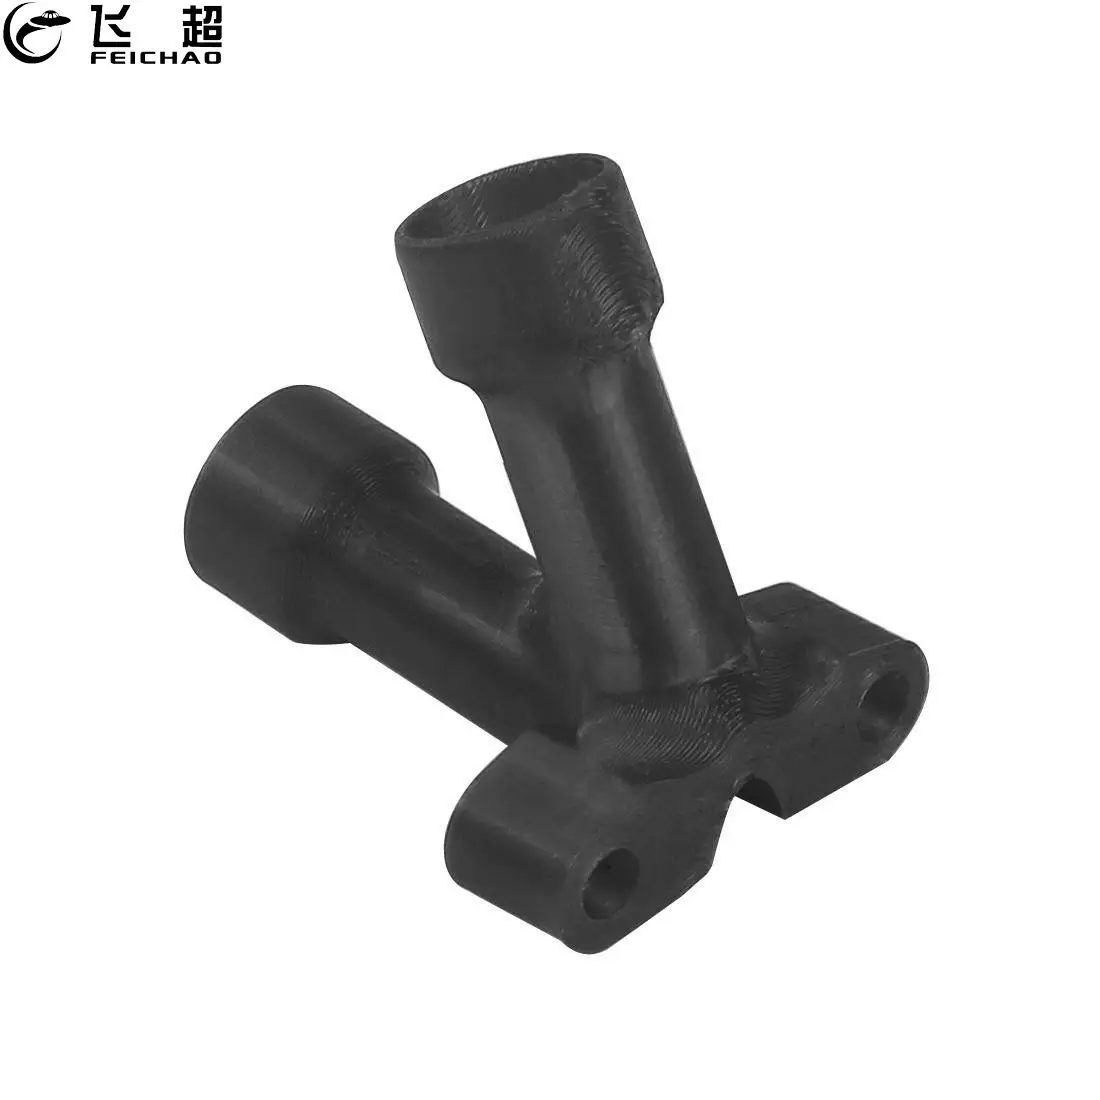 

FEICHAO 3D Printed TPU MMCX Antenna Mount Fixing Seat For FPV Air Unit Antenna for DJI FPV Air Unit Digital FPV System Parts